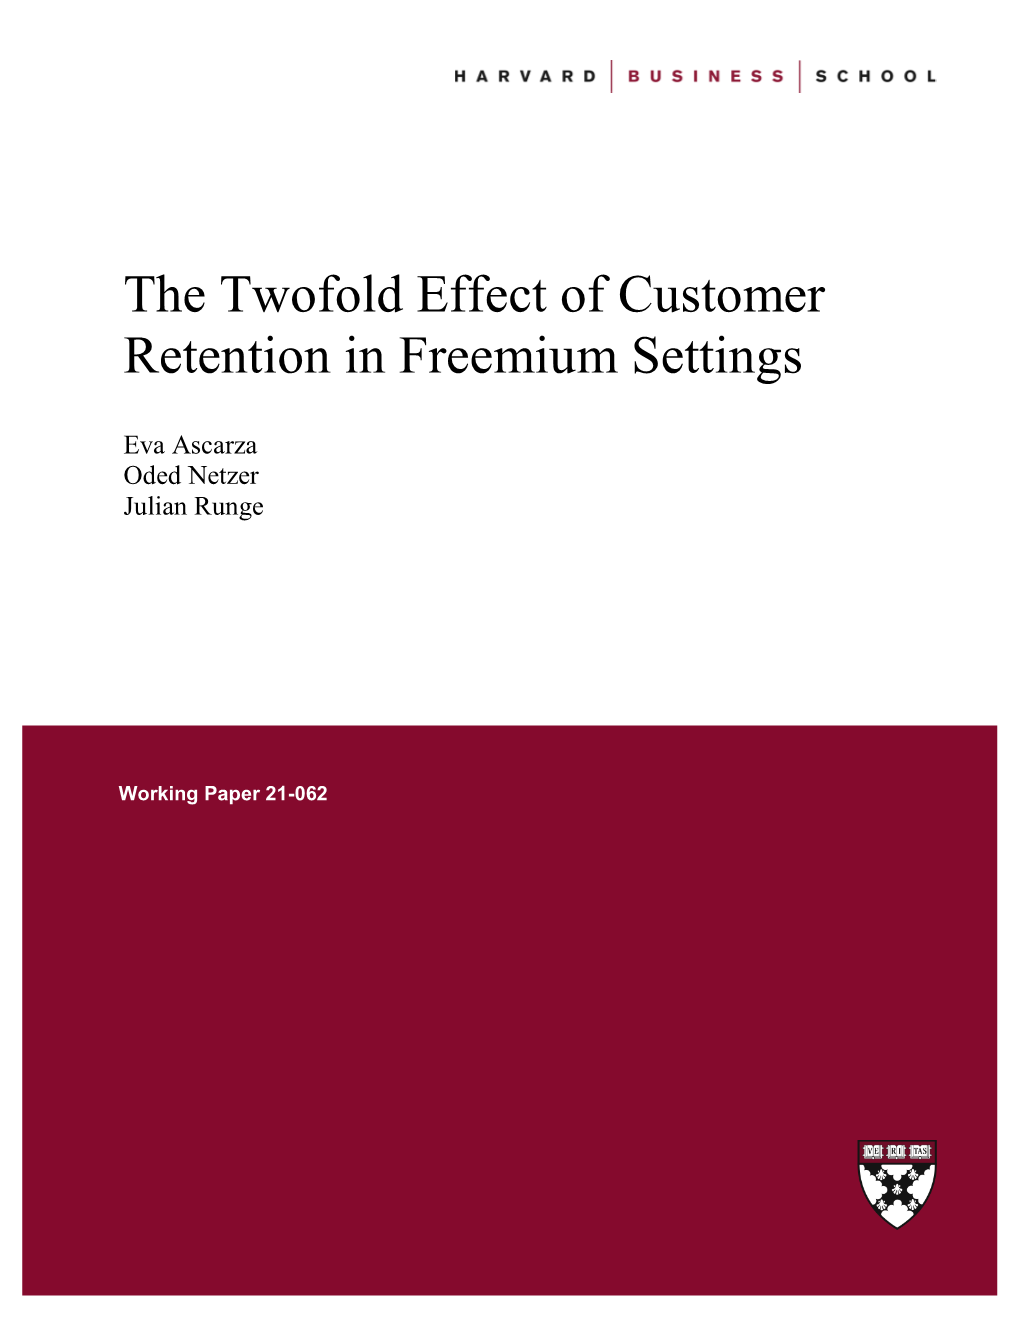 The Twofold Effect of Customer Retention in Freemium Settings